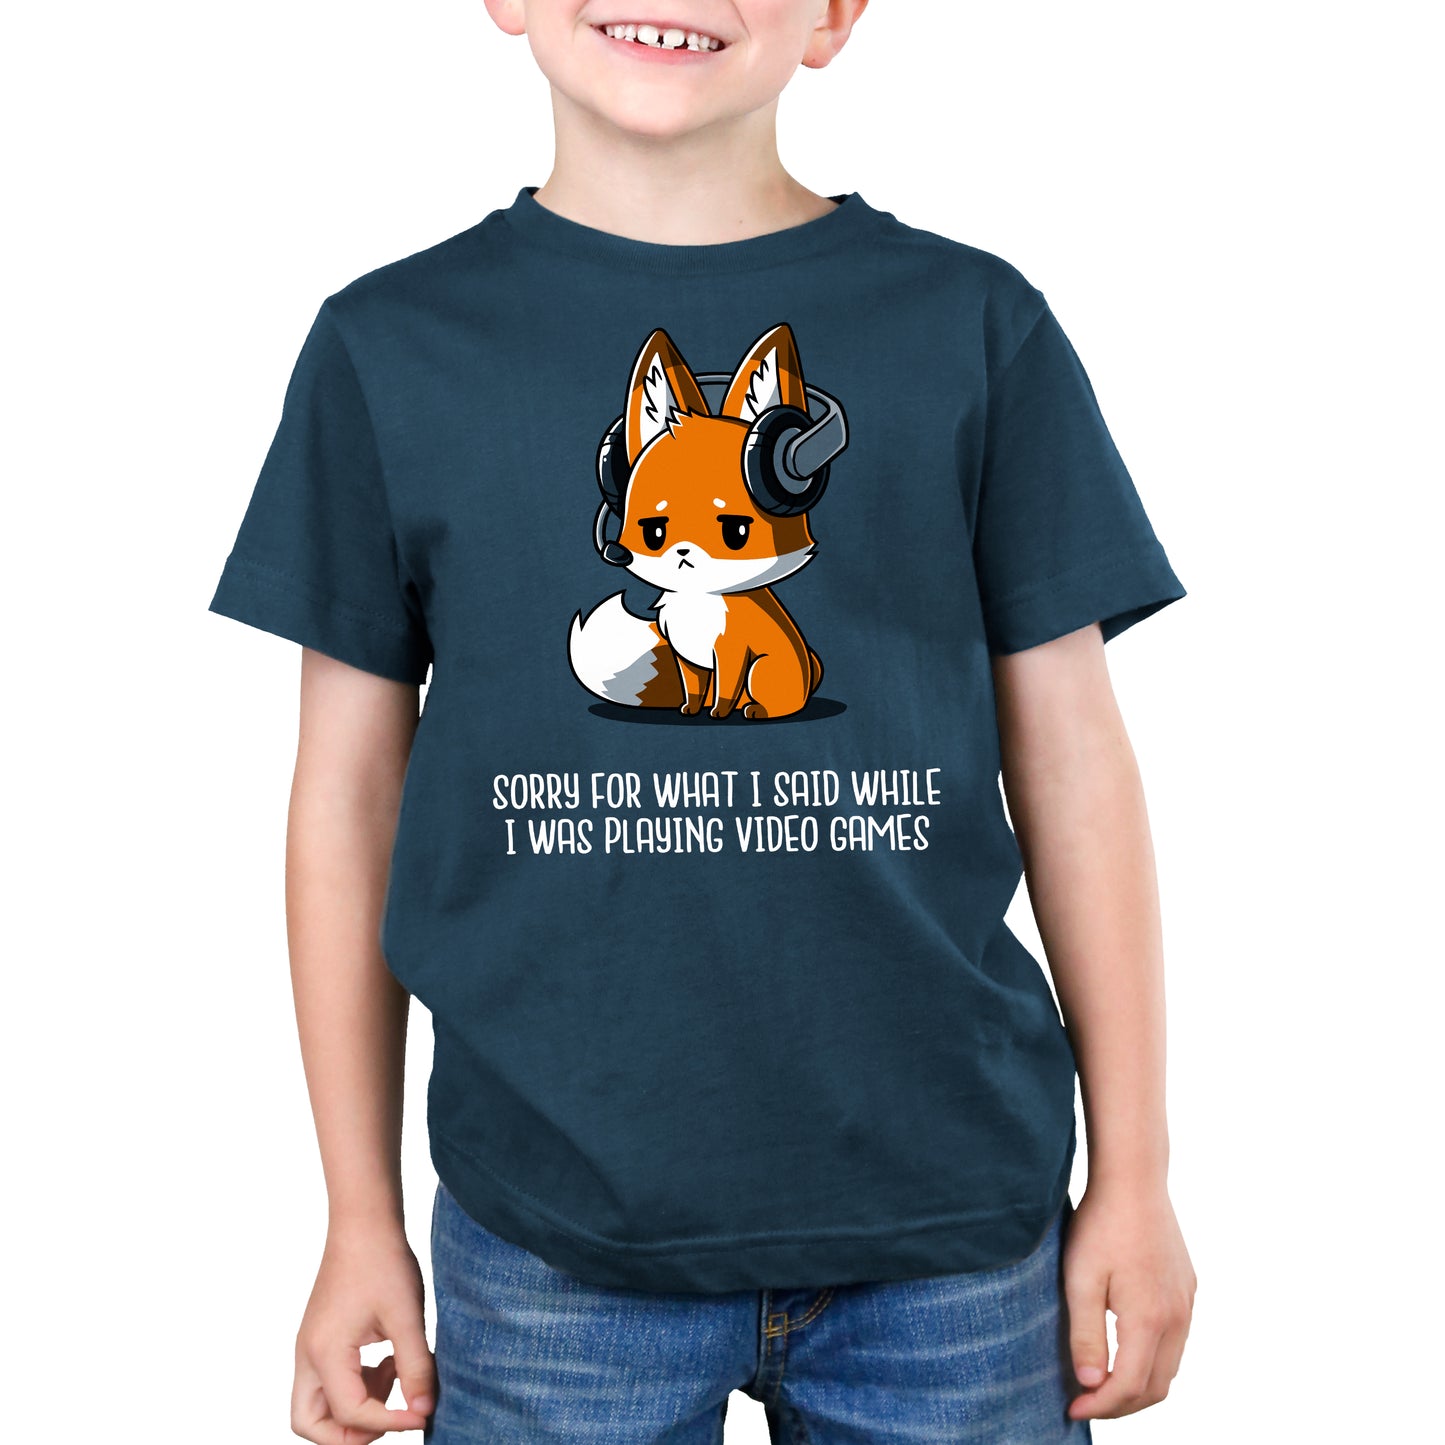 A young boy wearing a TeeTurtle "Sorry For What I Said" t-shirt while playing video games.